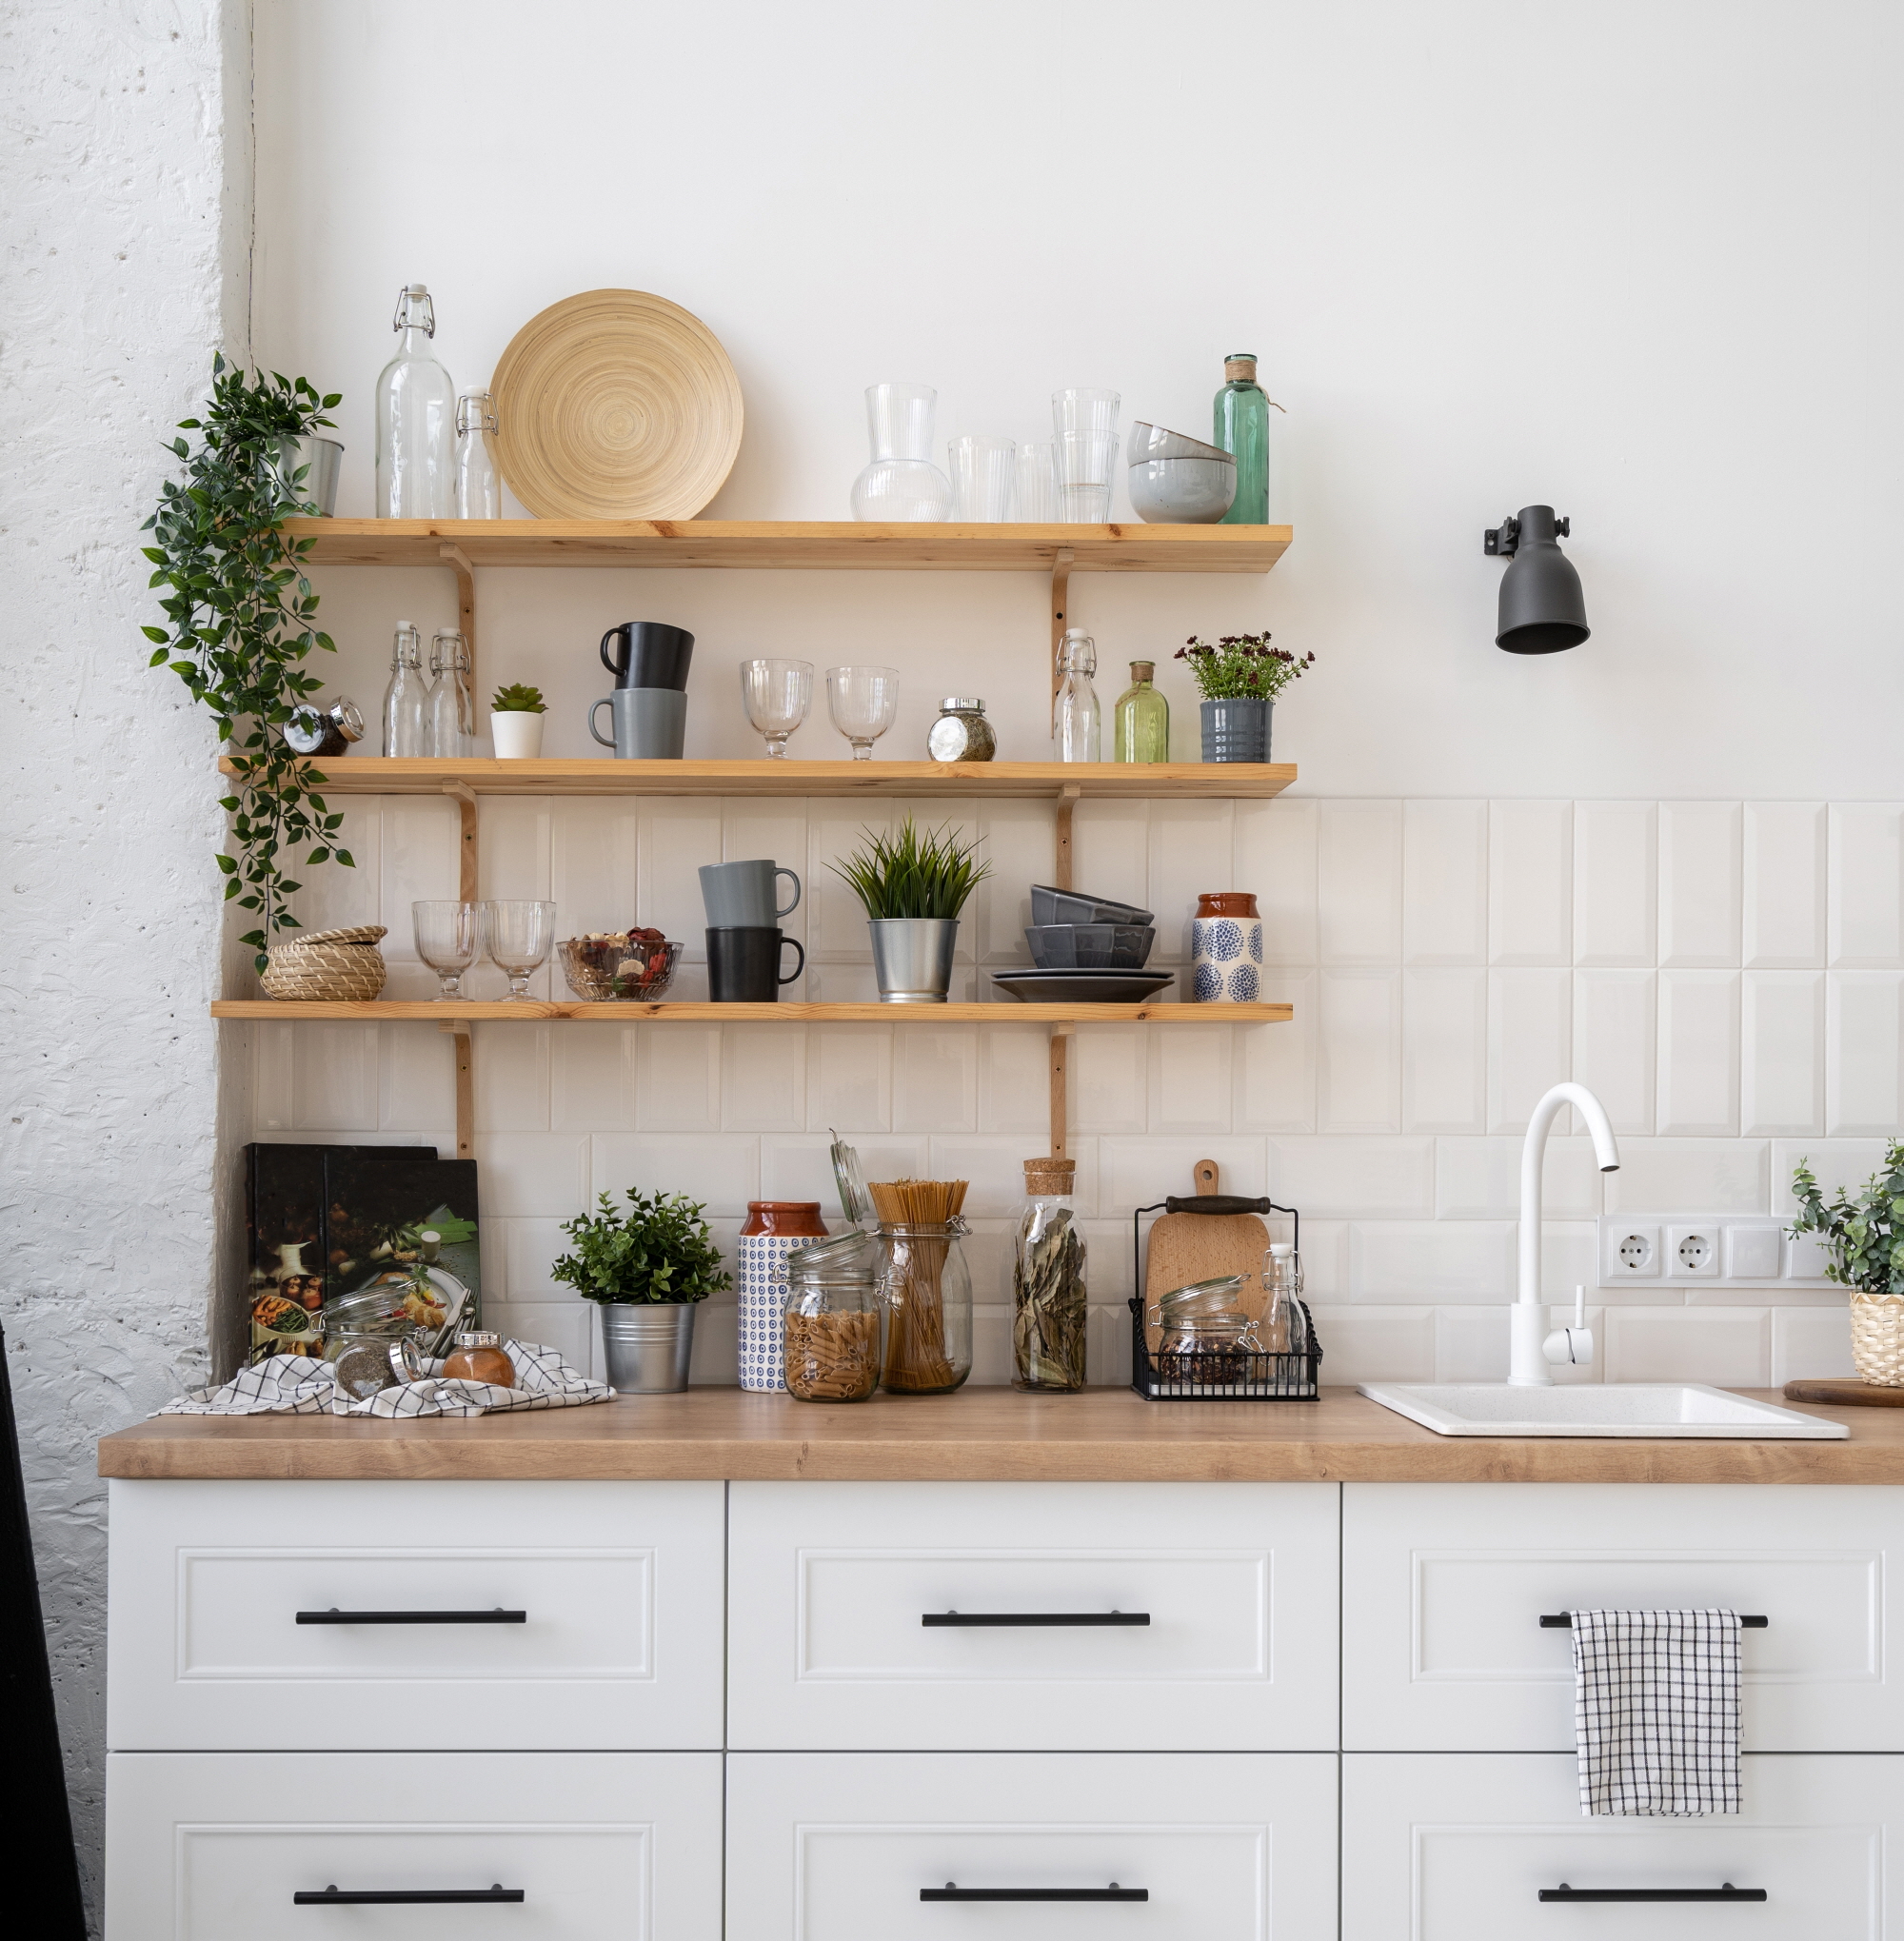 Revamp your kitchen with budget-friendly open shelving. Display essentials creatively, ditching costly cabinets for trendy, personalized flair.